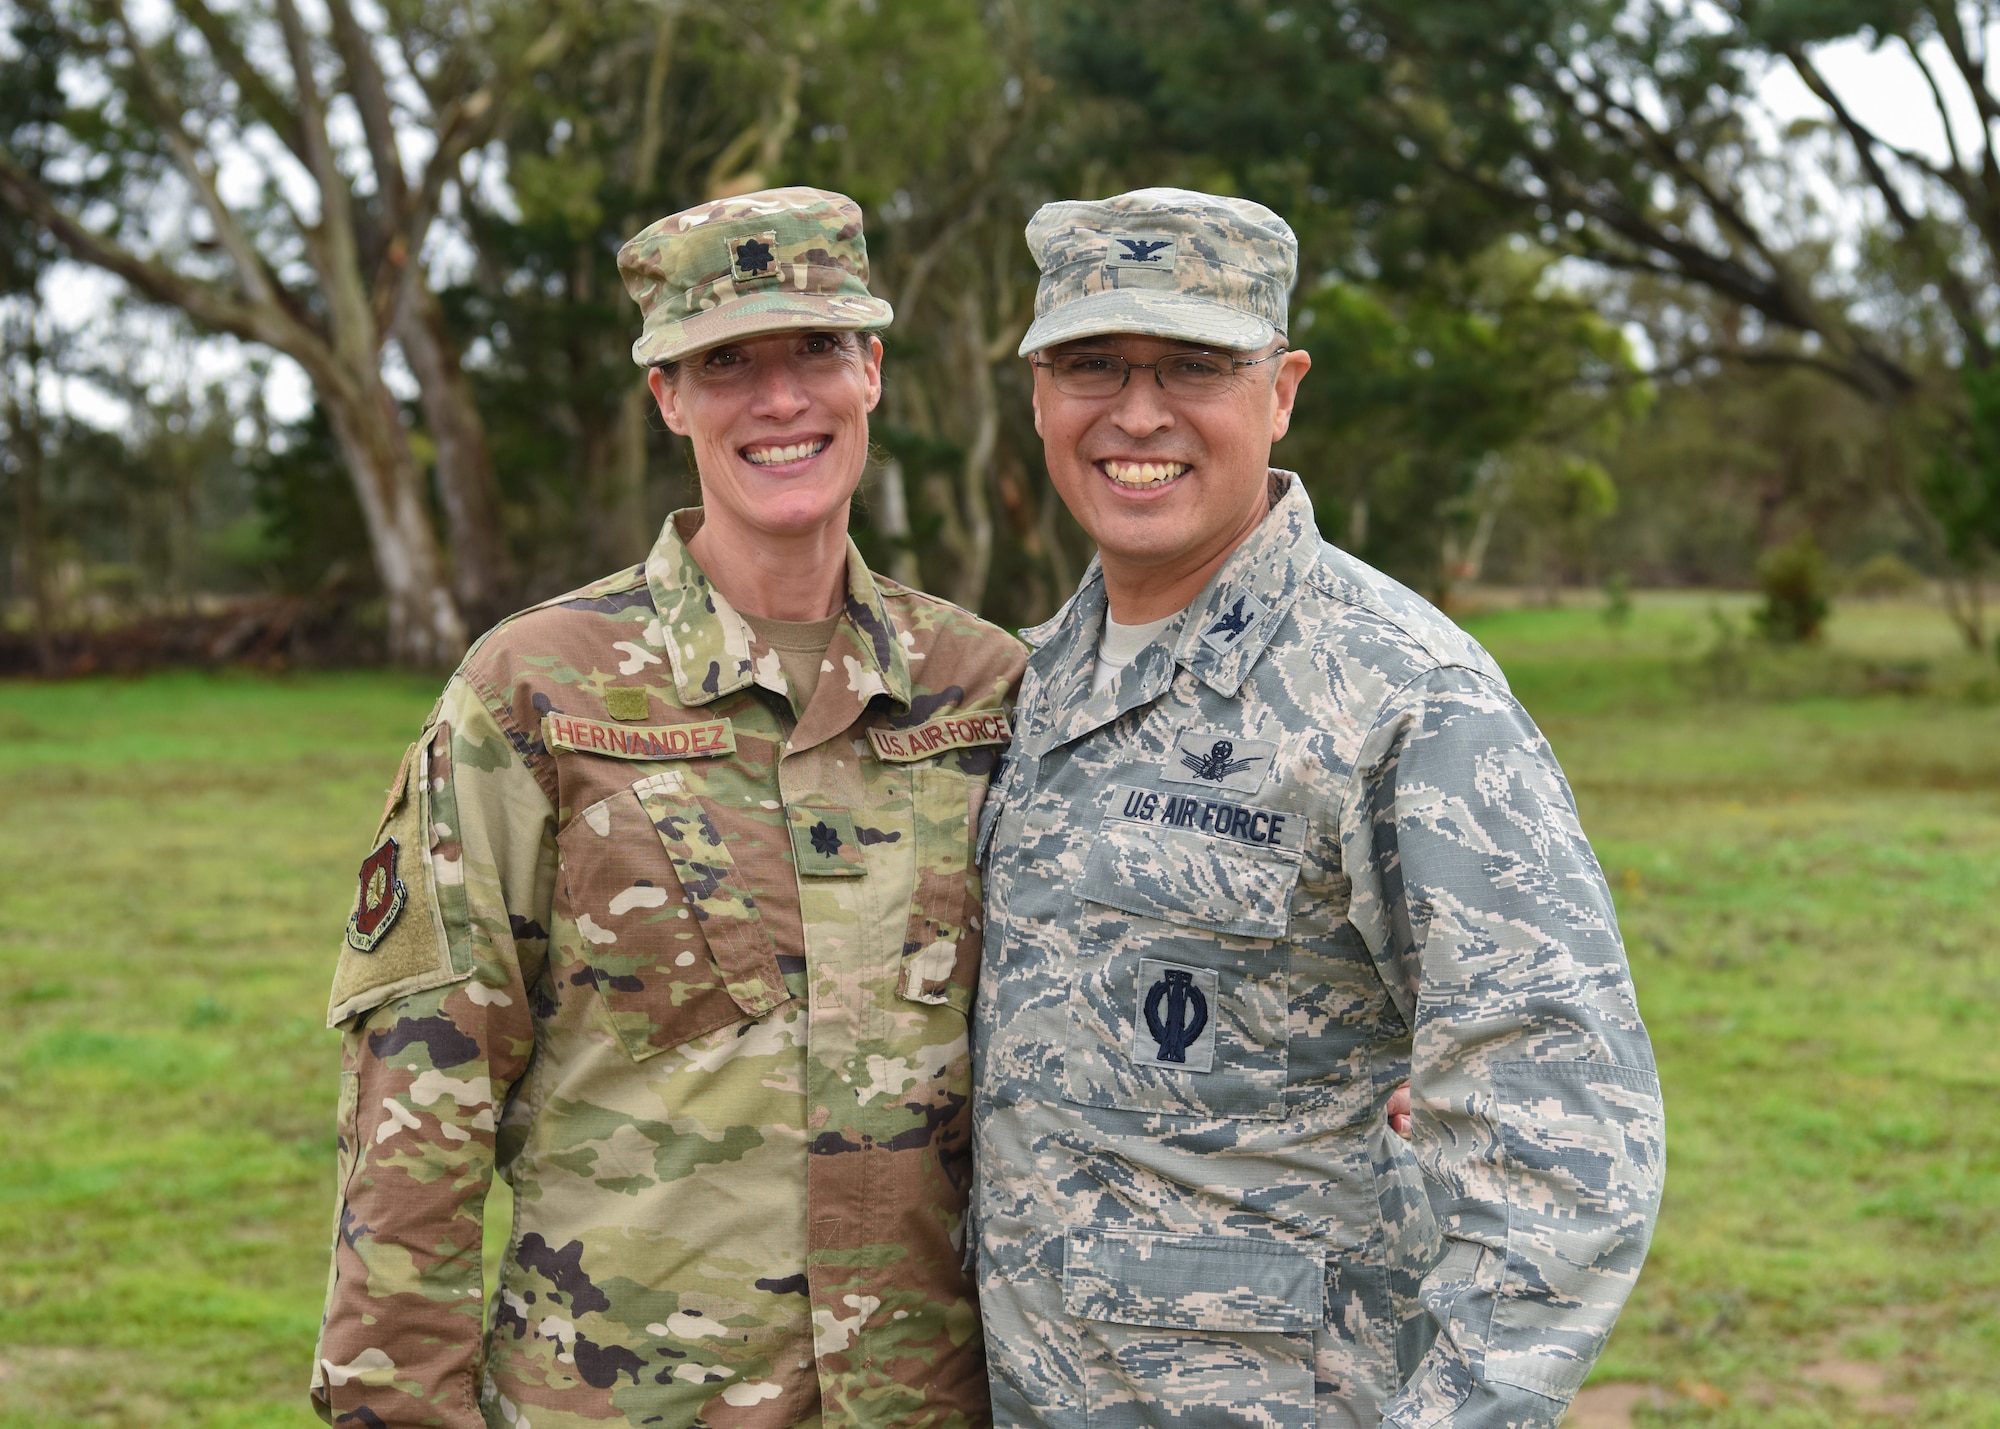 Col. Curtis Hernandez, 30th Operations Group commander, and Lt. Col. Ericka Hernandez, 14th Air Force director, manpower and personnel, celebrate their permanent change of station at Vandenberg Air Force Base, Calif. Jan. 9, 2019. “While in a dual military marriage, my wife and I have learned to communicate better,” Col. Hernandez said. “The time that we have spent apart has made us appreciate what we have and improved our quality of life.”